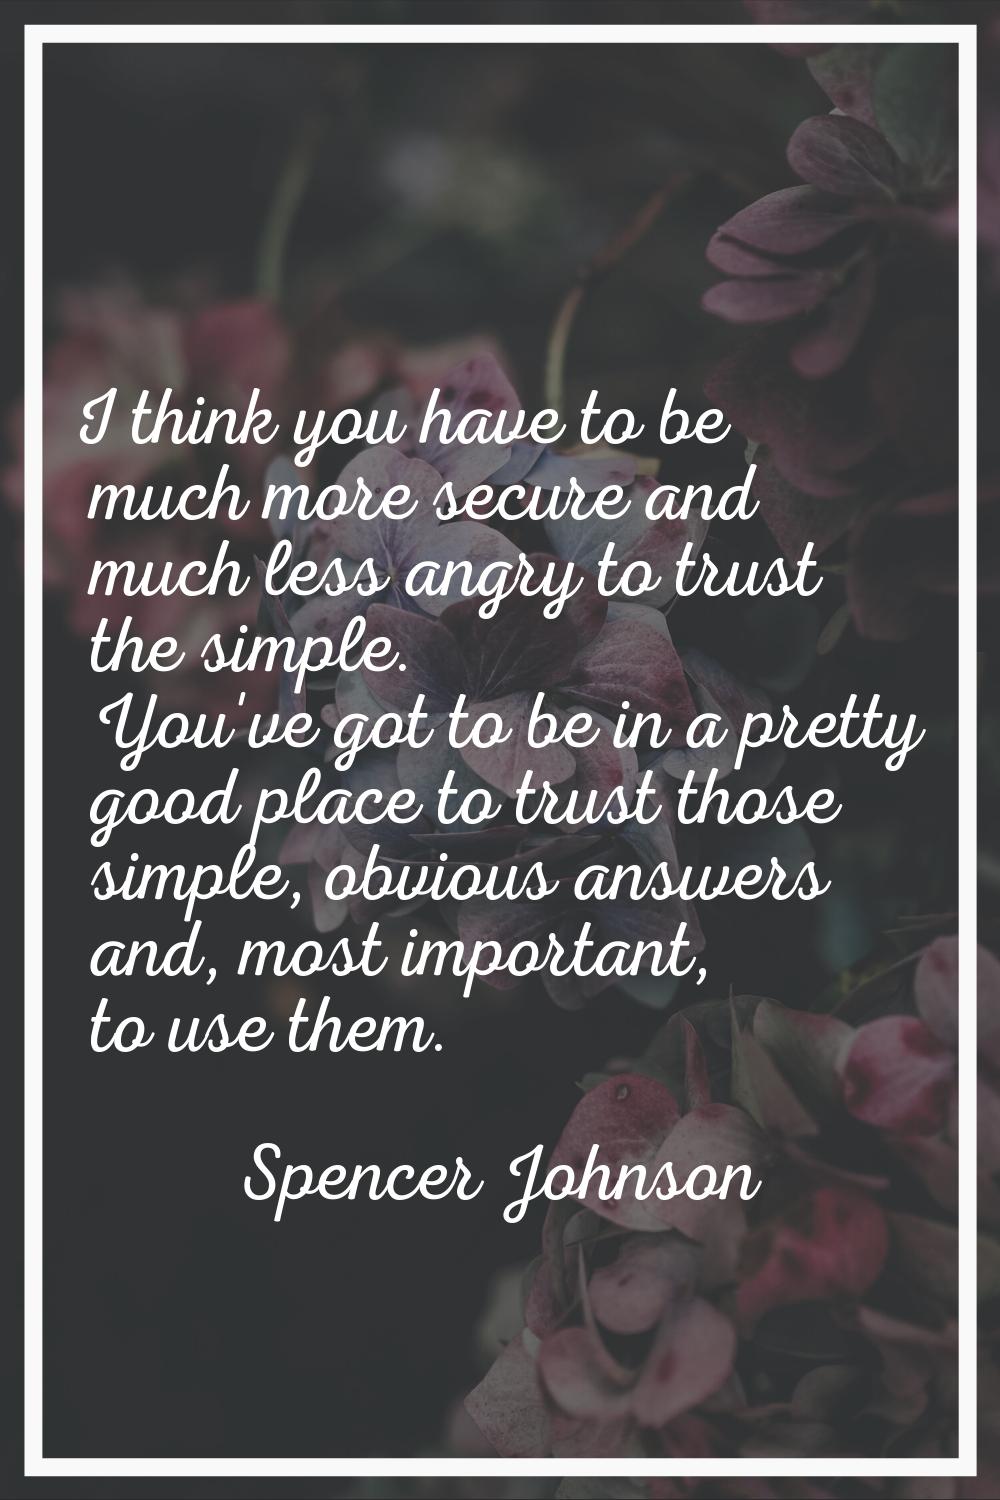 I think you have to be much more secure and much less angry to trust the simple. You've got to be i